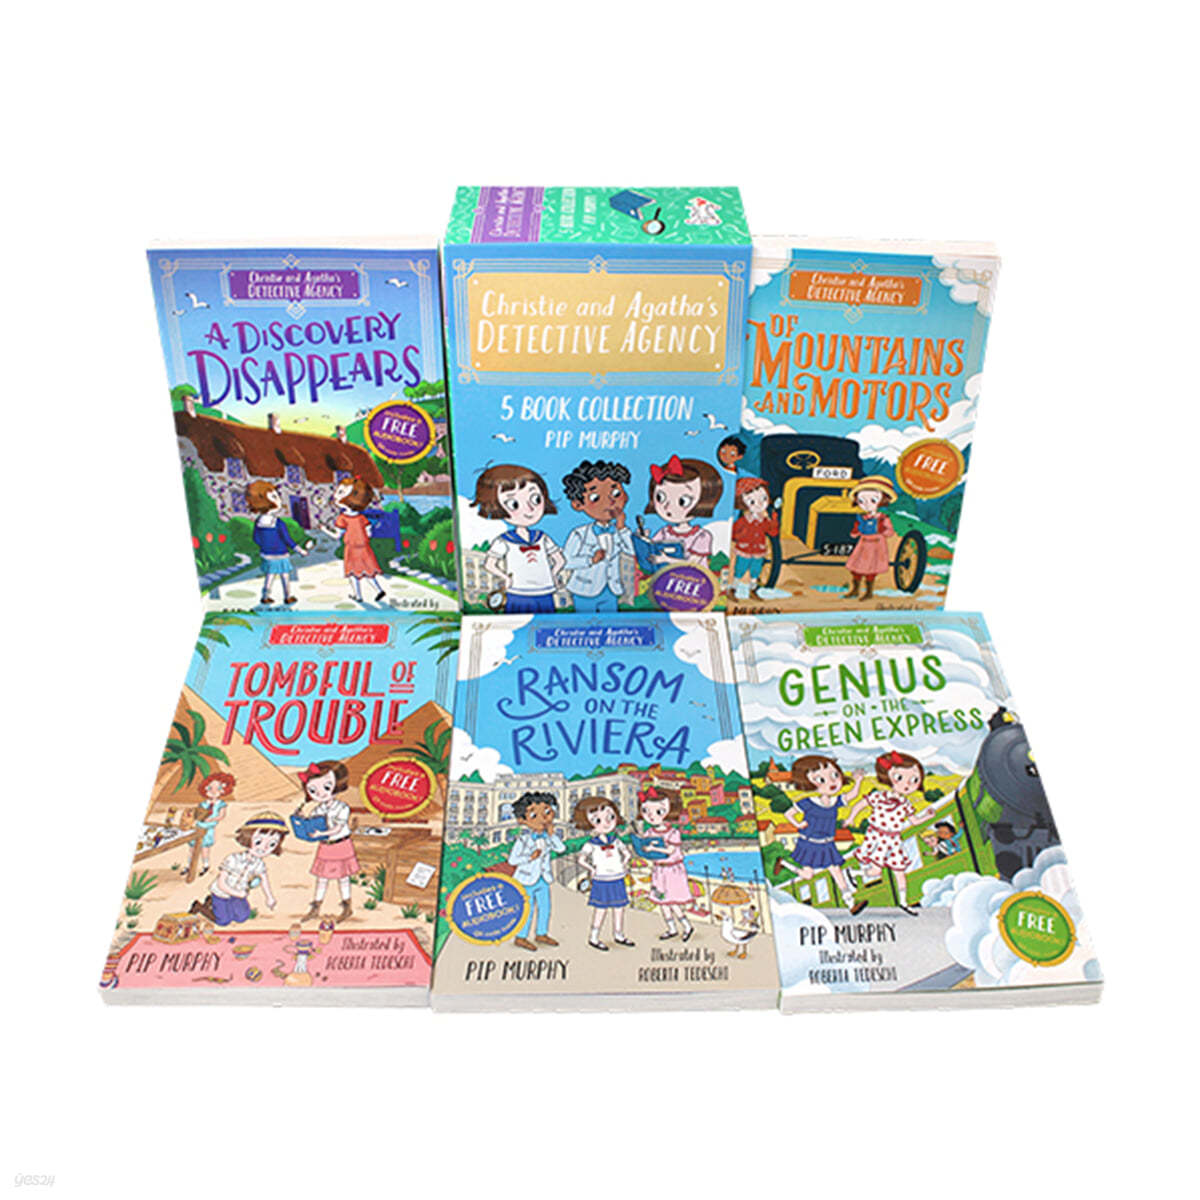 Christie and Agatha&#39;s Detective Agency 5 Books Collection Set (QR음원 포함) - 챕터북